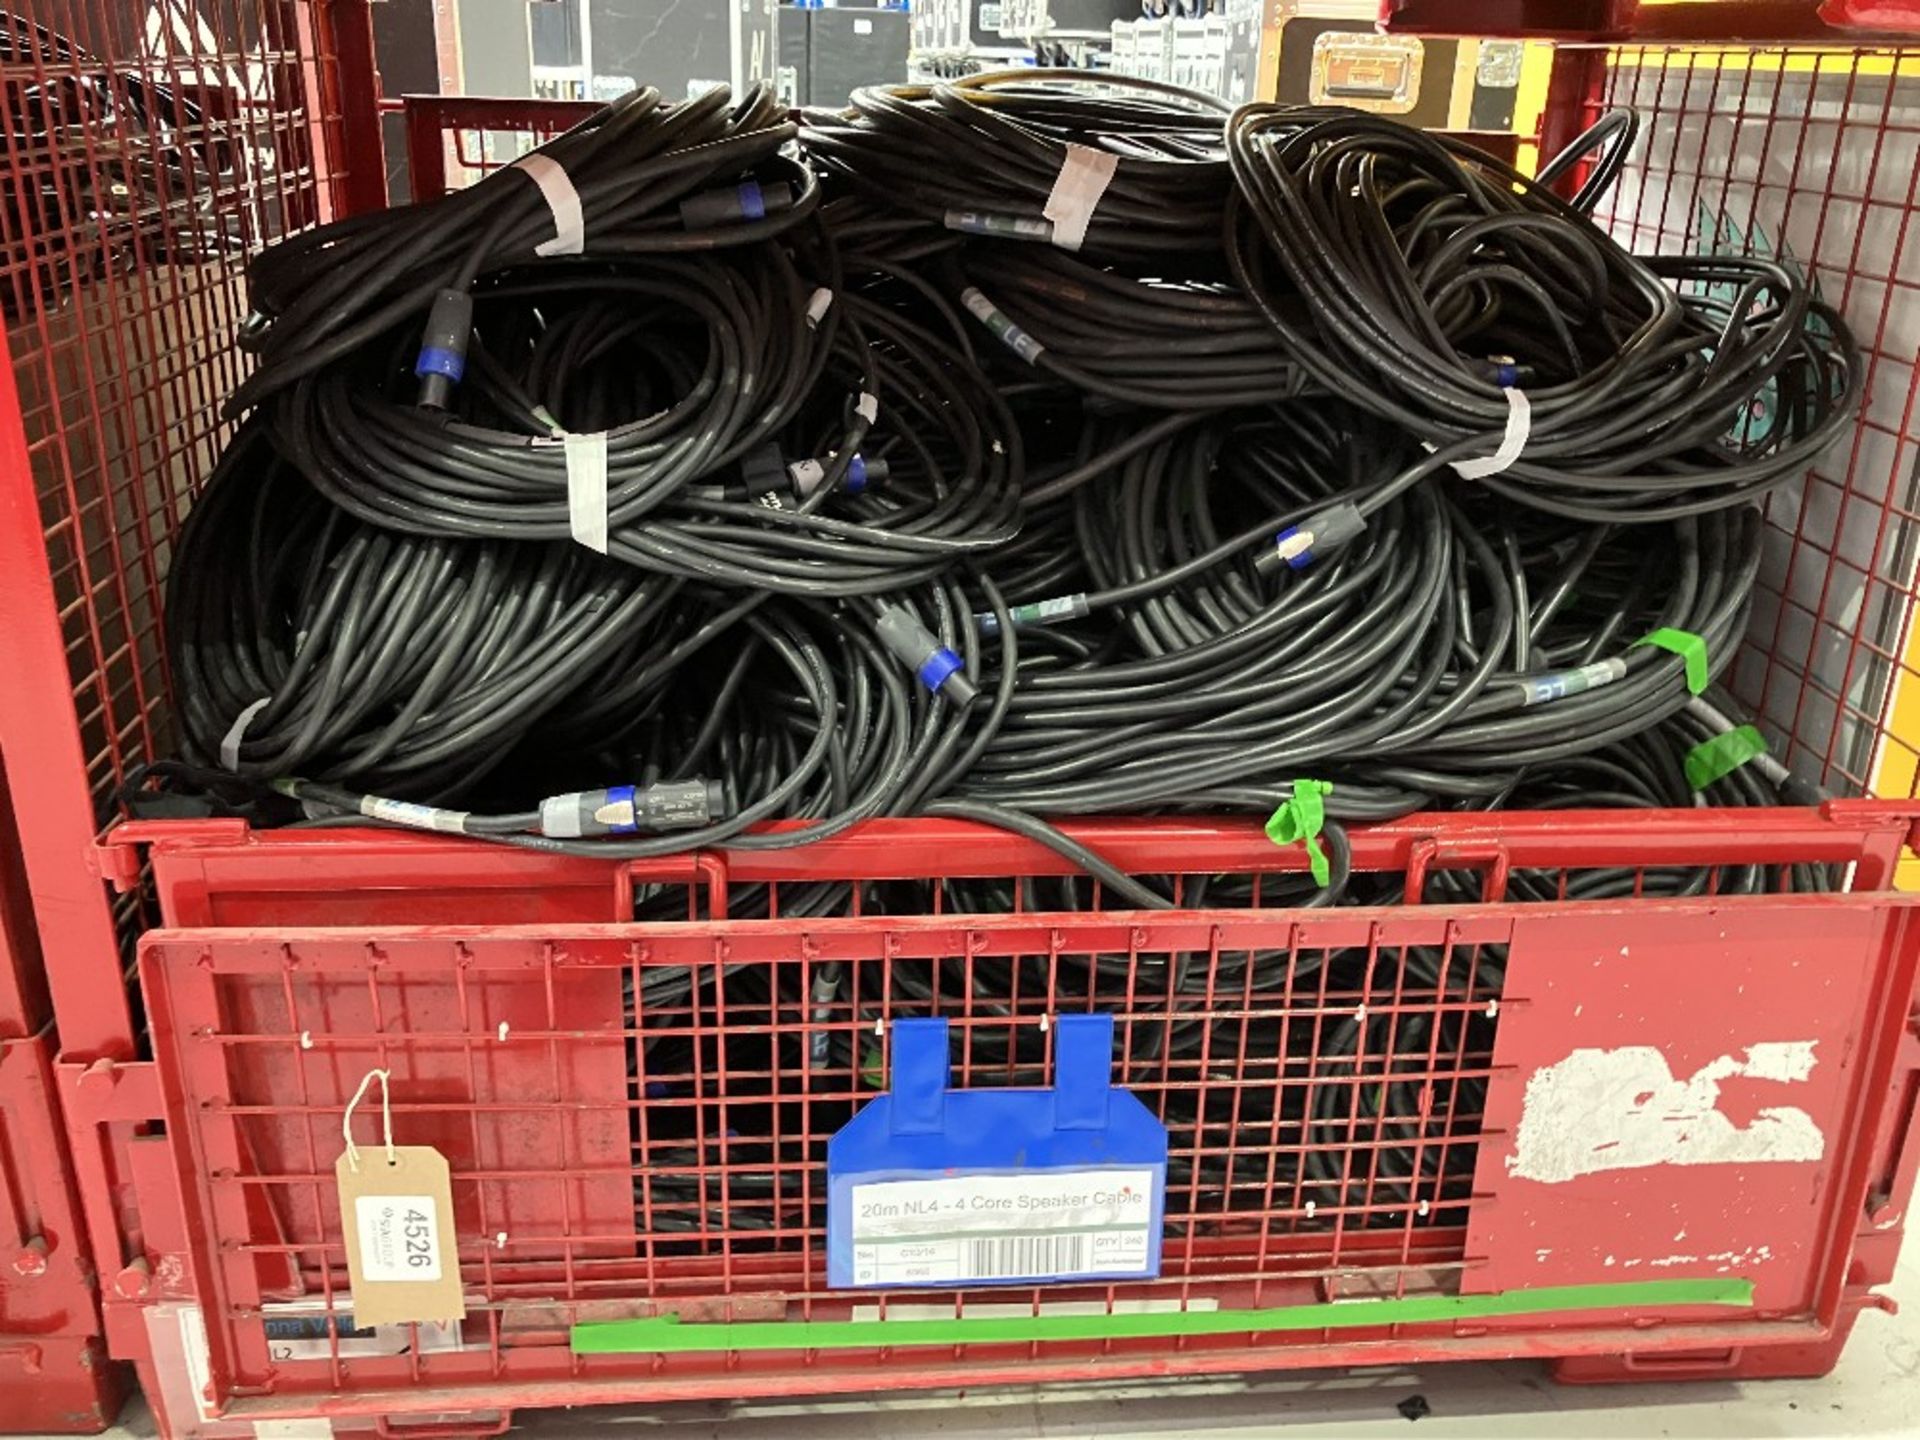 Large Quantity of 20m NL4-4 Core Speaker Cable with Steel Fabricated Stillage - Bild 5 aus 5